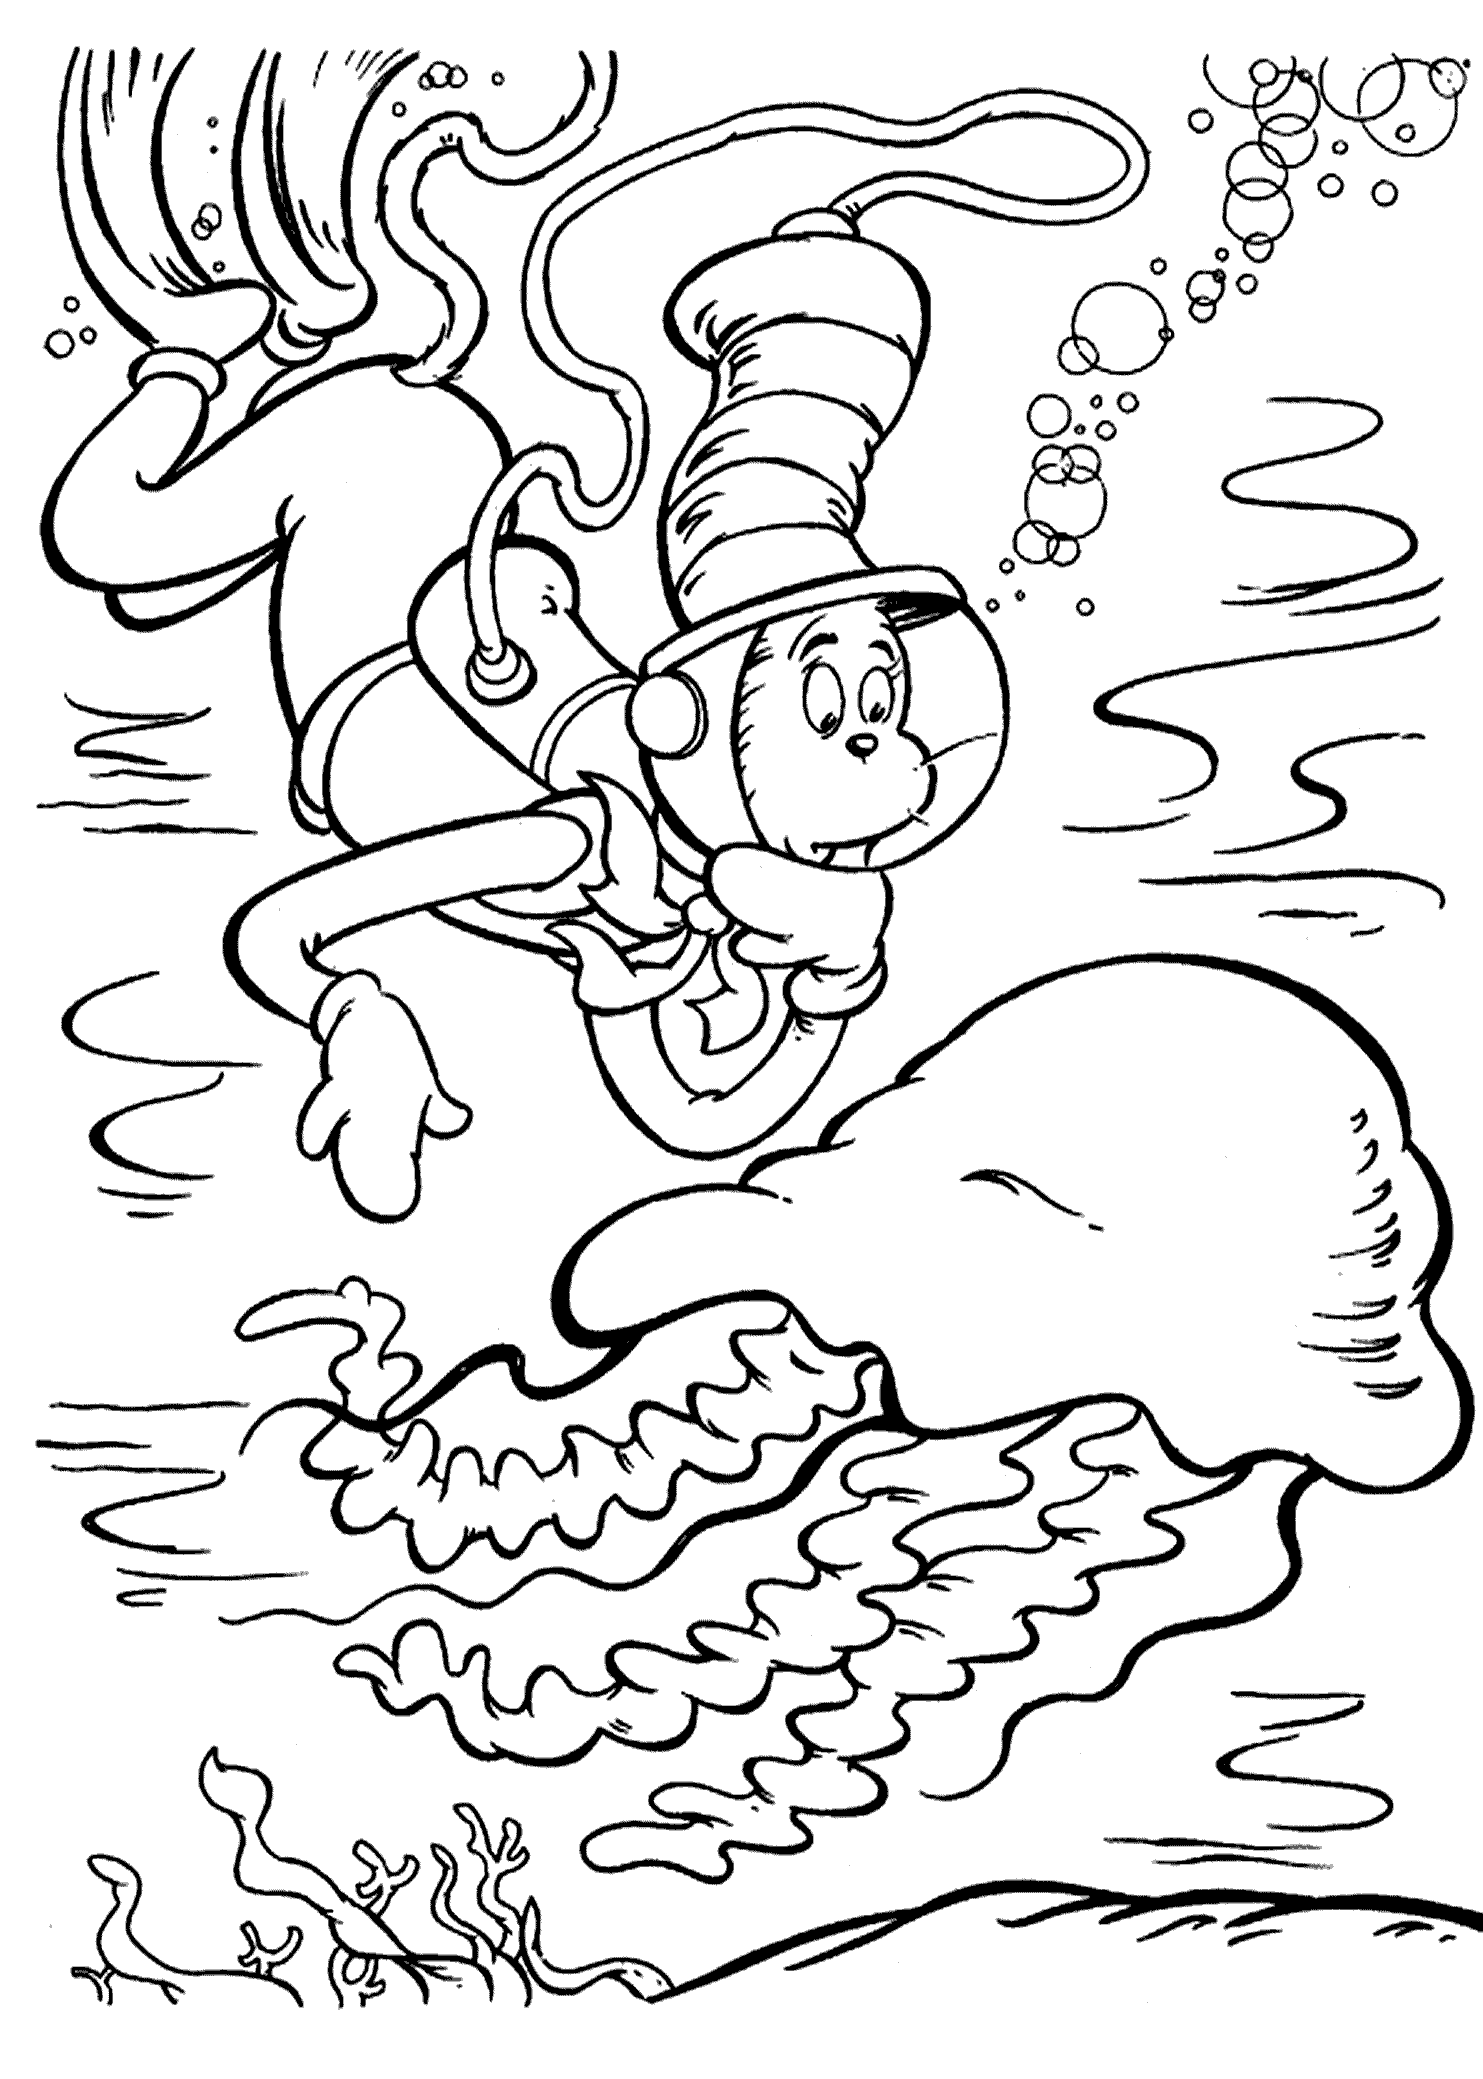 wacky wednesday dr seuss coloring pages - Clip Art Library